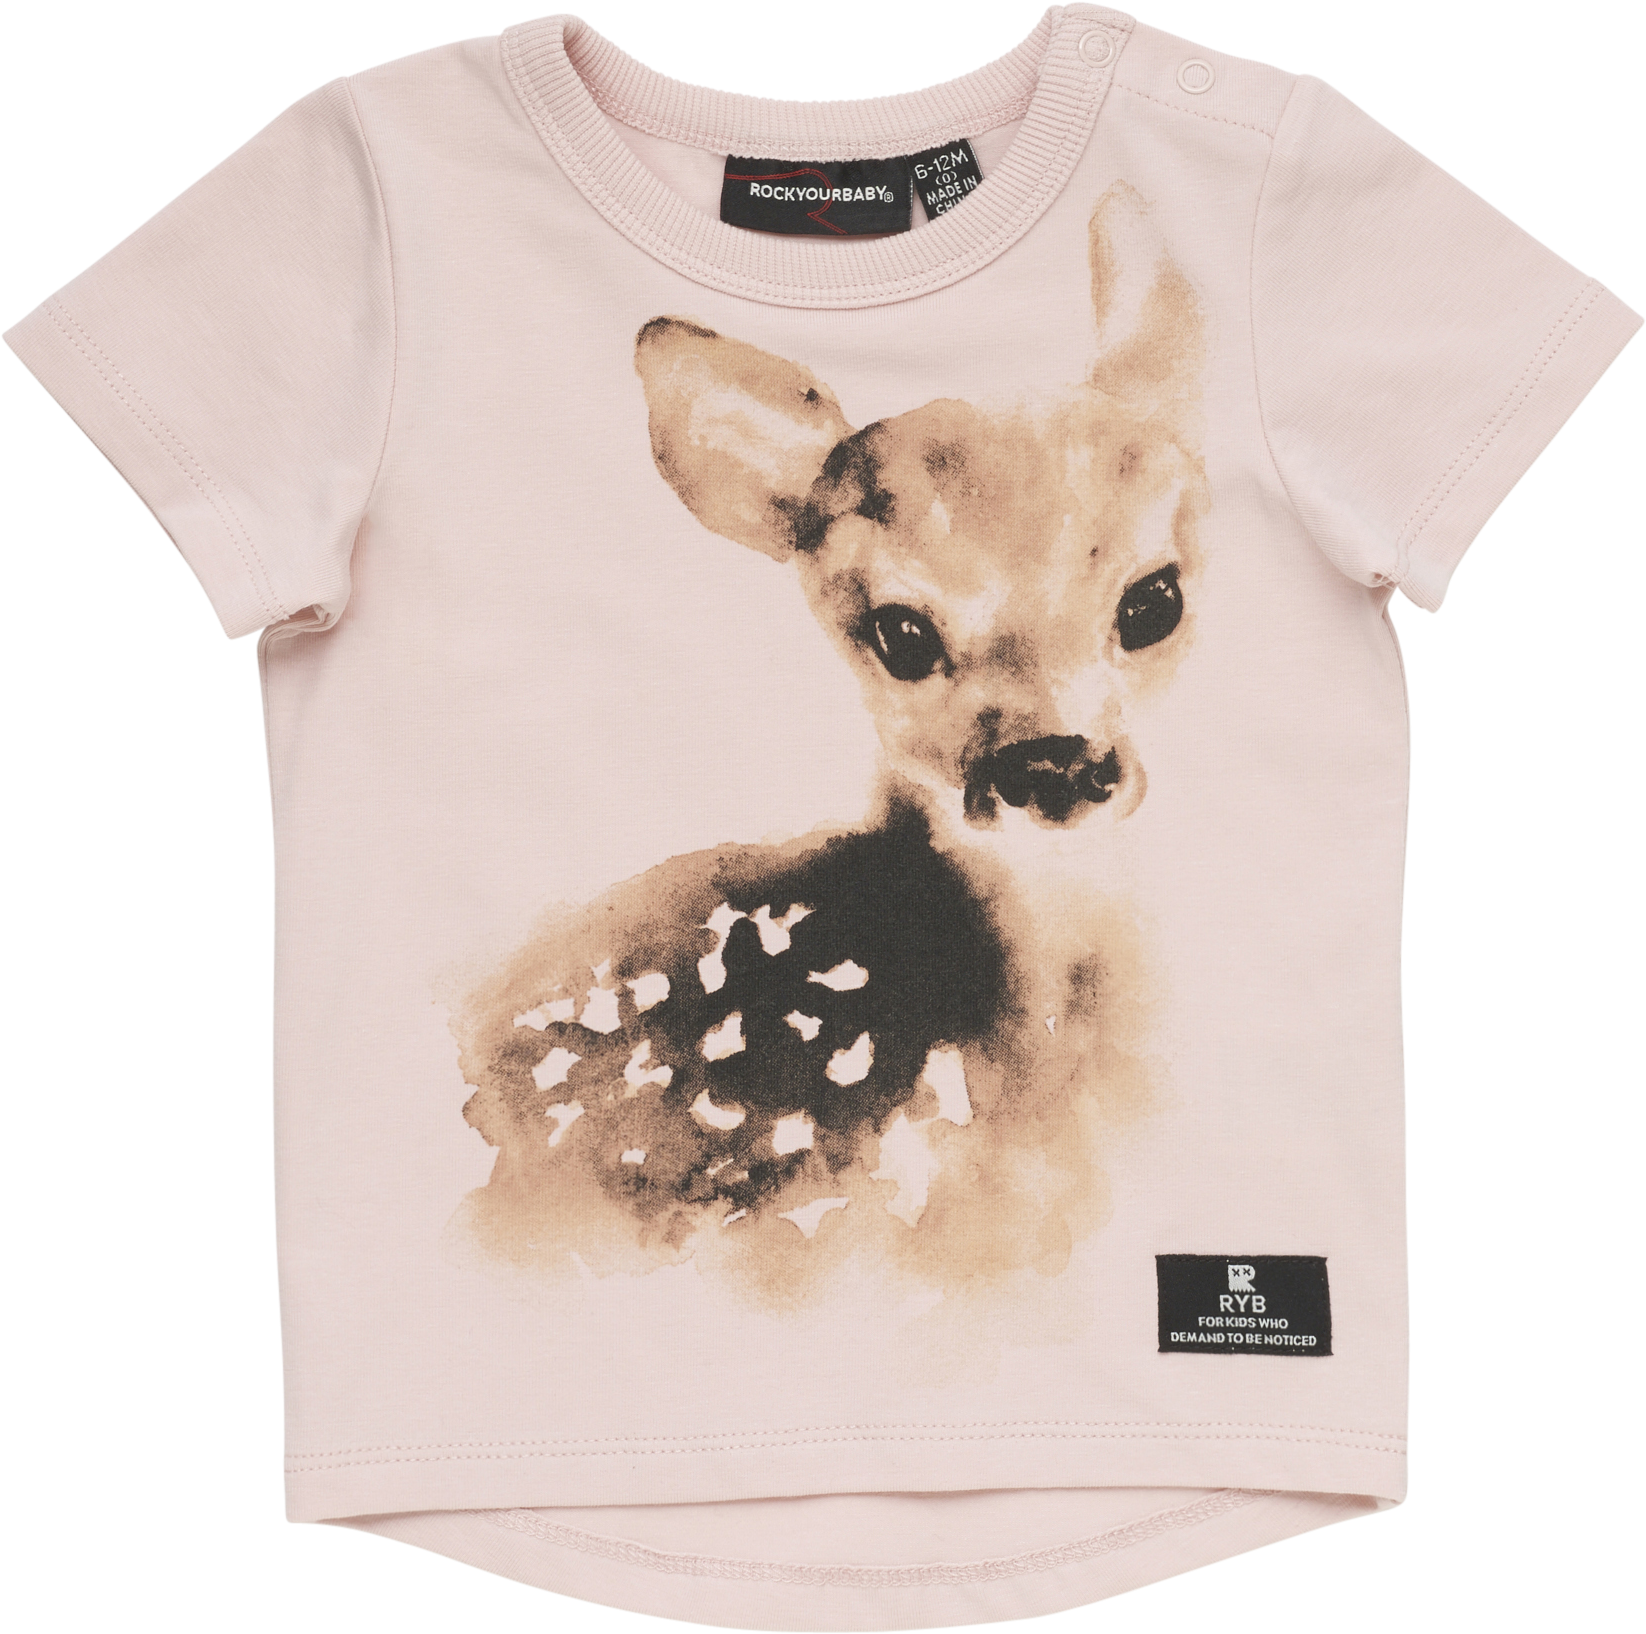 A Pink Shirt With A Deer On It